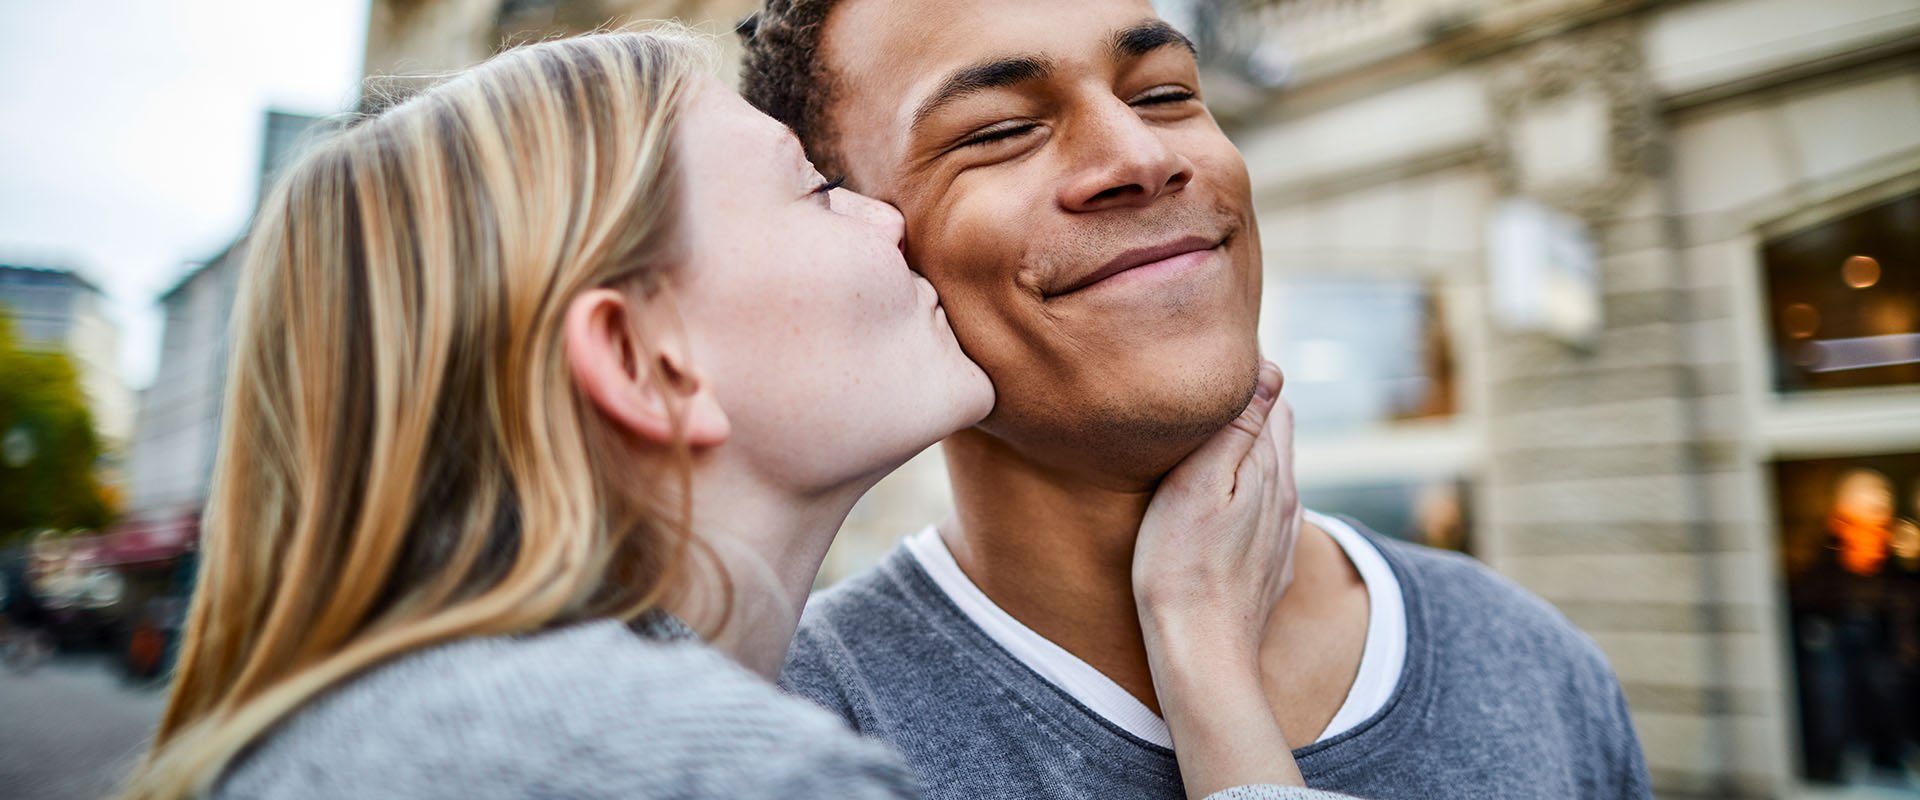 When Should the First Kiss Happen? Should You Kiss on a First Date?